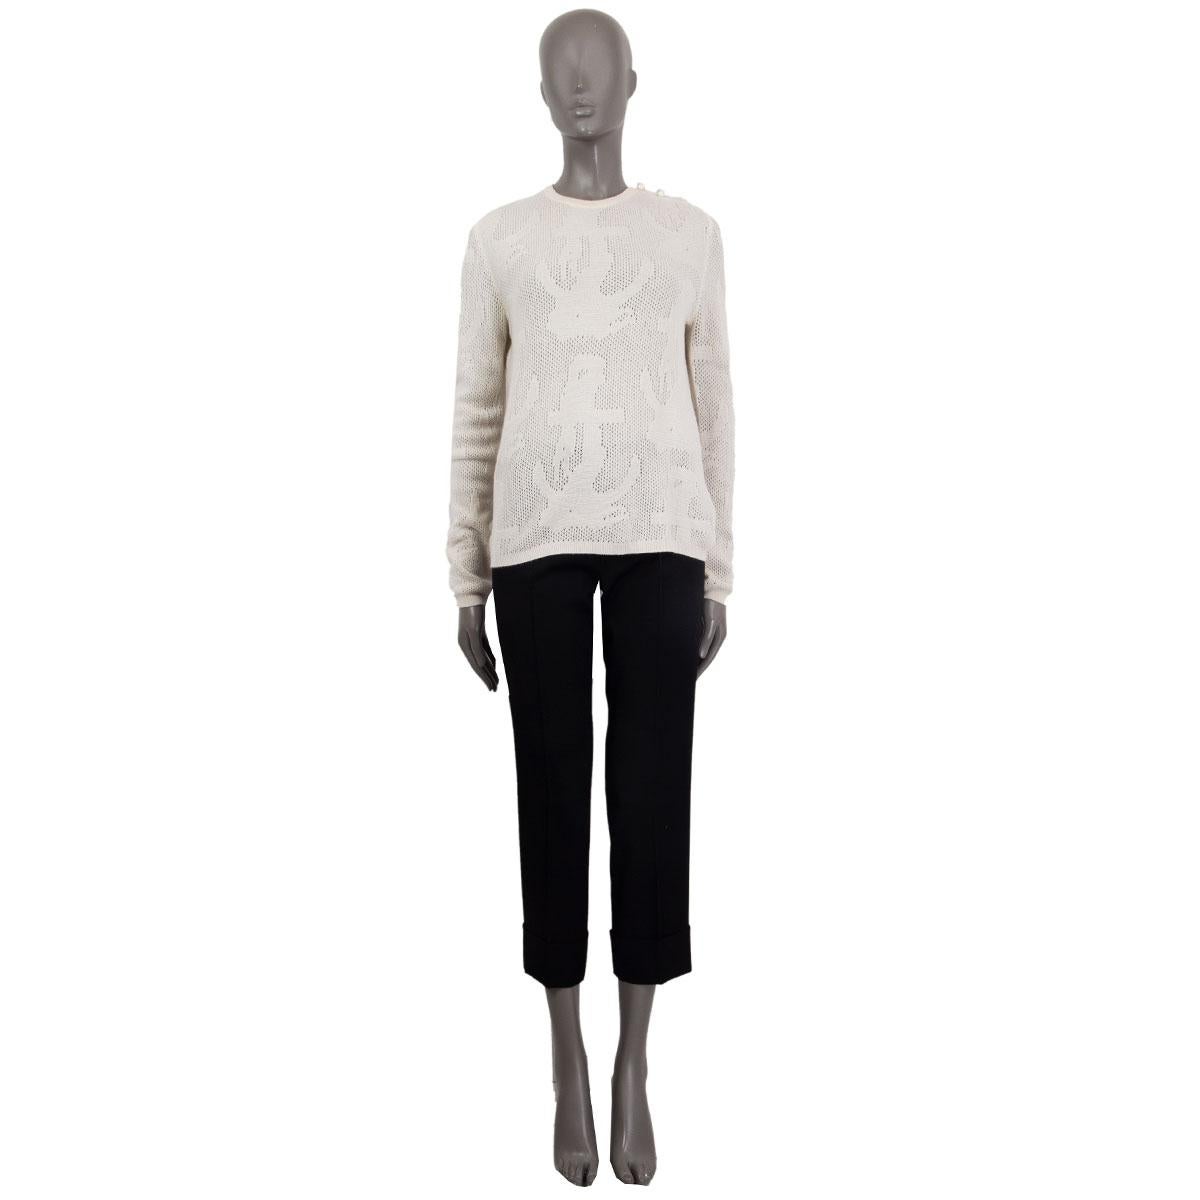 100% authentic Thom Browne loose-knit anchor motif crew-neck sweater in cream  cashmere (100%) with faux pearl detail on the shoulder. Has been worn and is in excellent condition. 

Measurements
Tag Size	3
Size	M
Shoulder Width	37cm (14.4in)
Bust